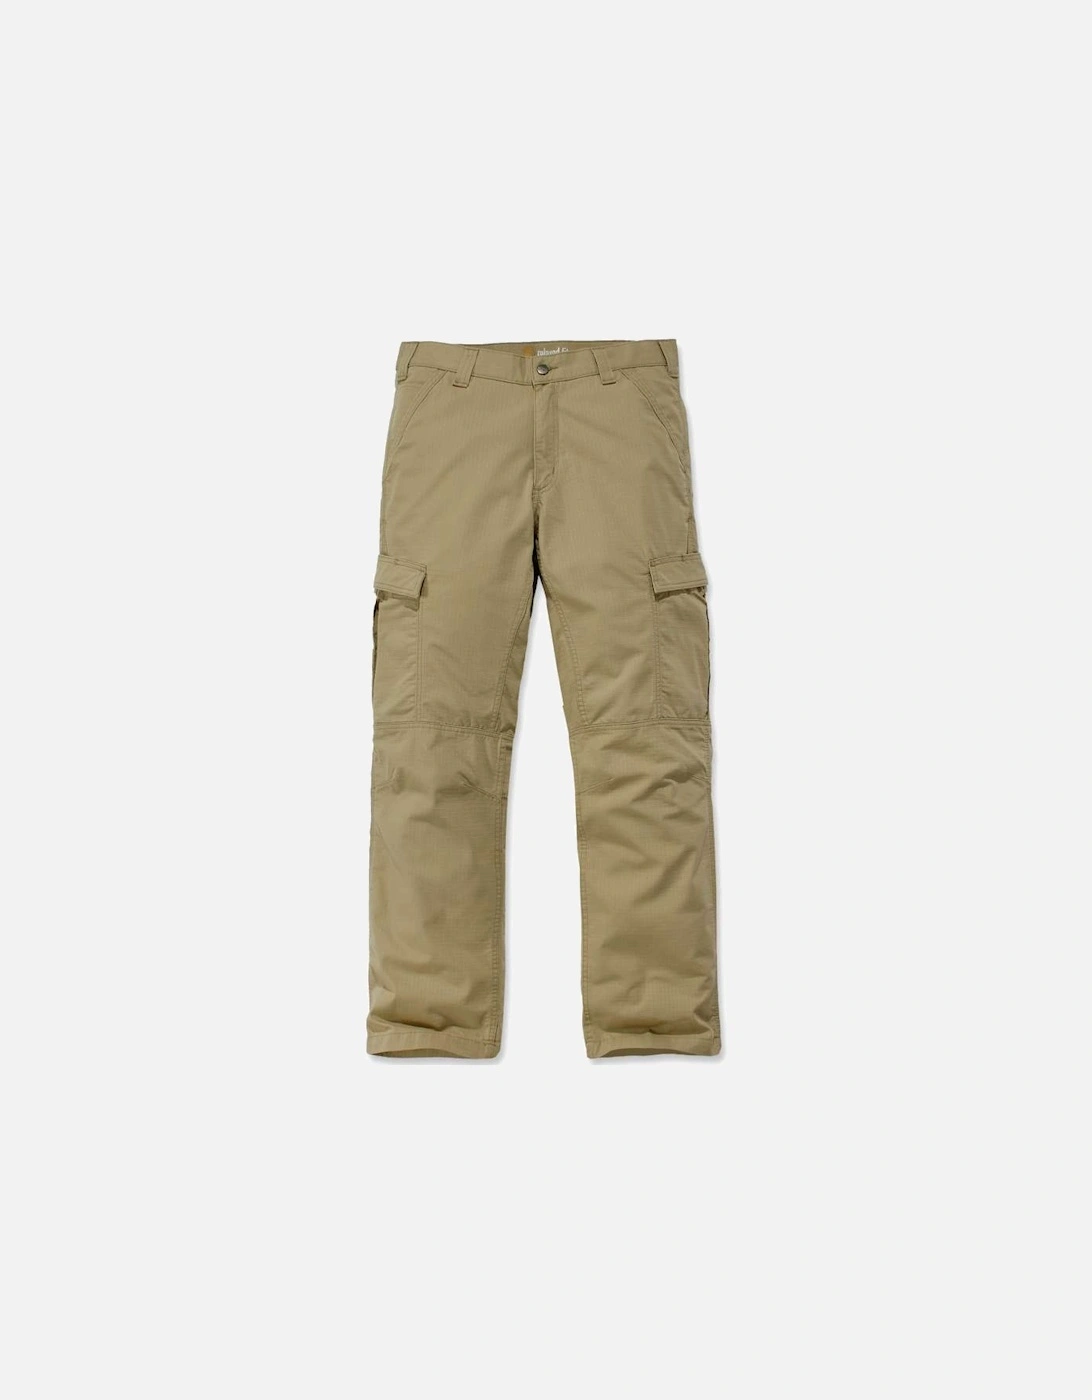 Carhartt Mens Force Broxton Cargo Rugged Trousers Pants